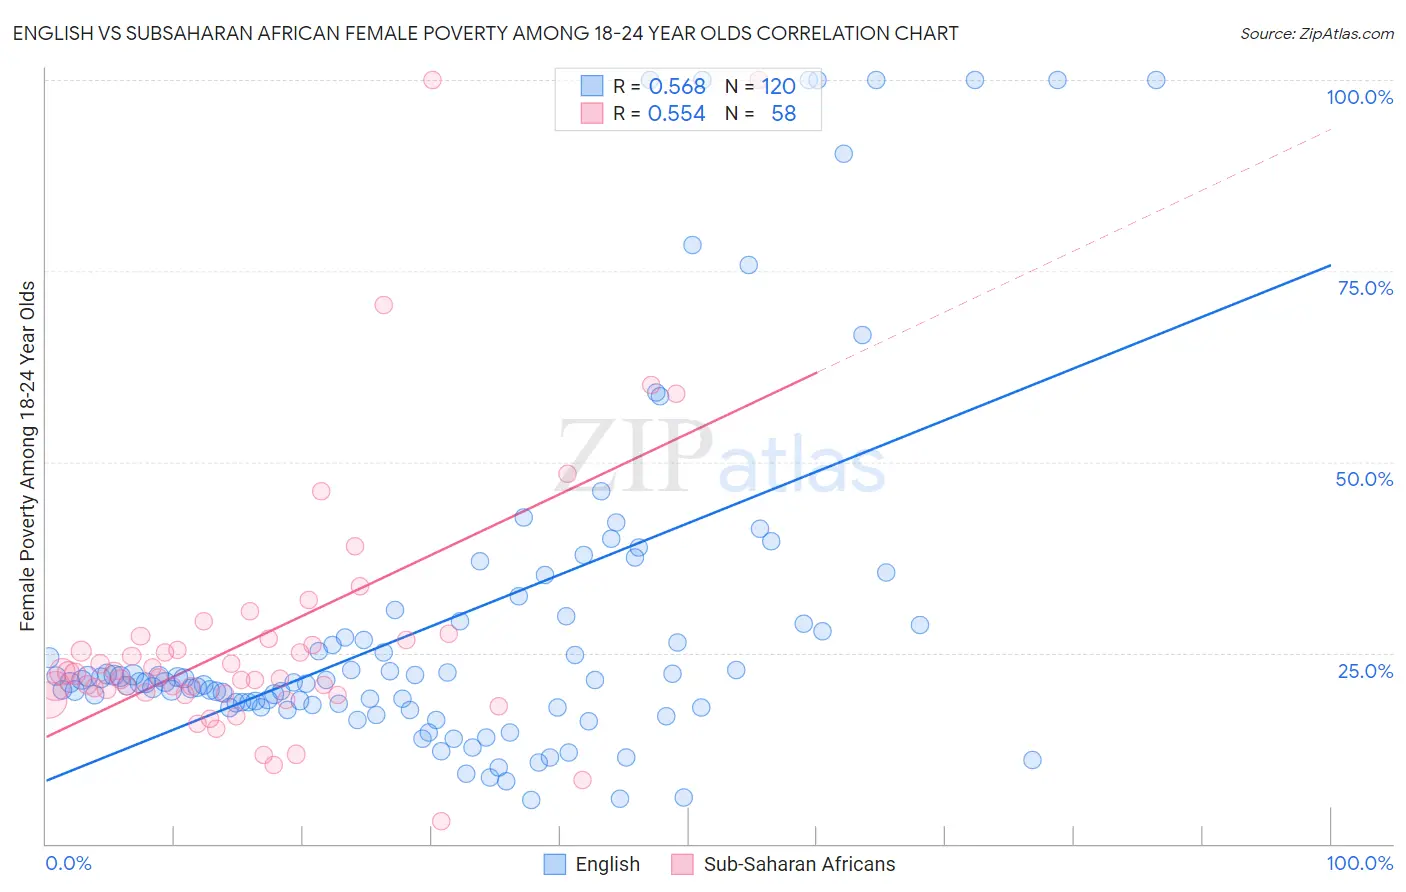 English vs Subsaharan African Female Poverty Among 18-24 Year Olds